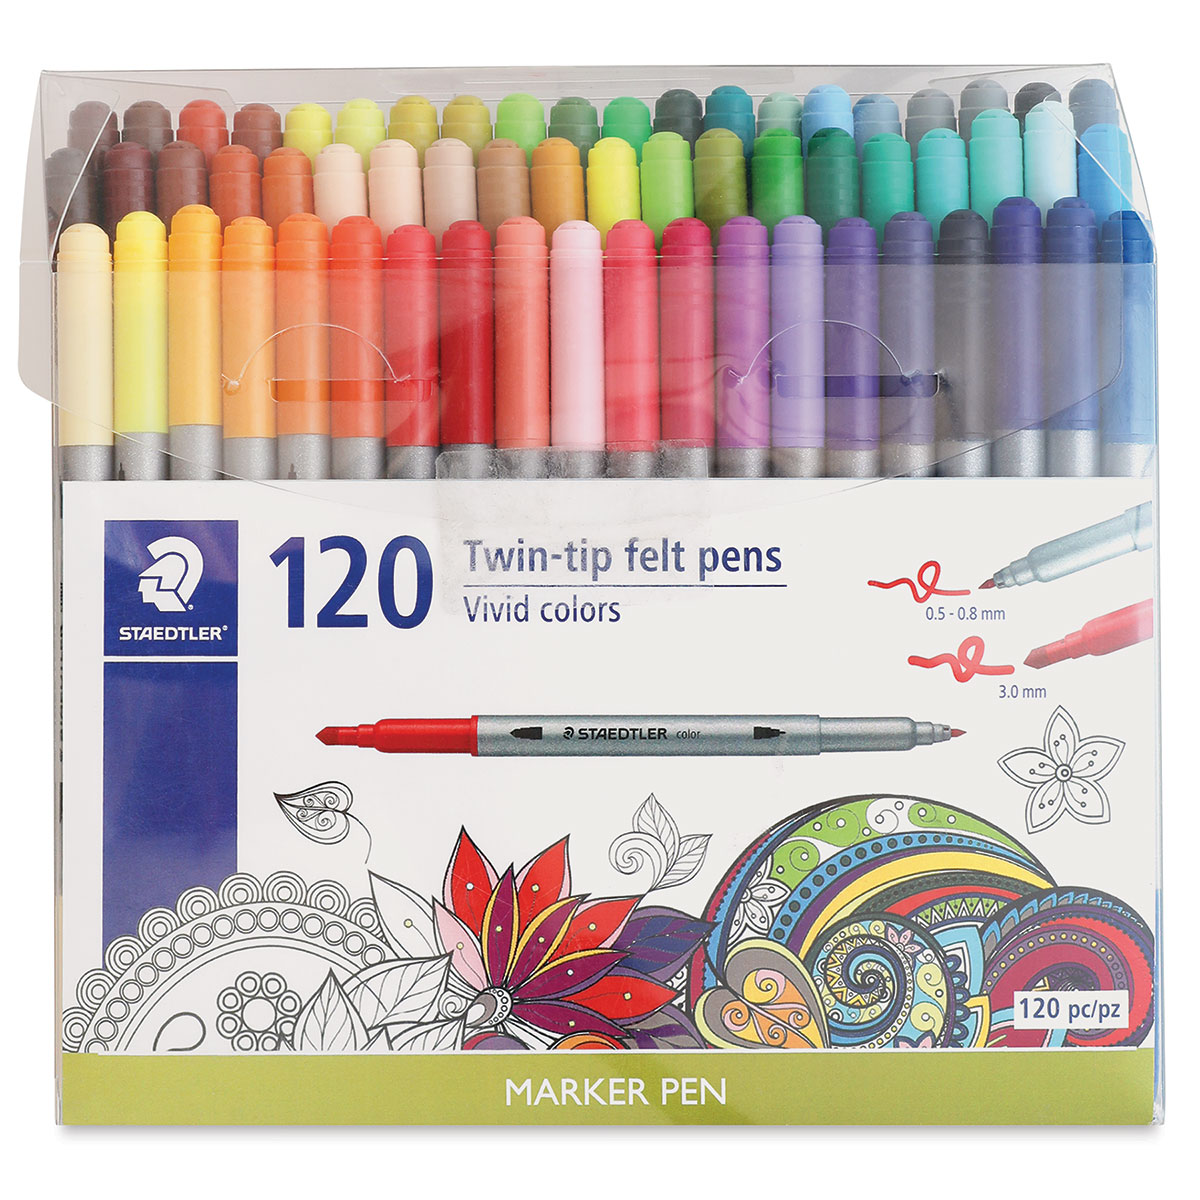 Swatch and Sort 72 Staedtler Double-ended Fibre Tip Pens in Color Order 